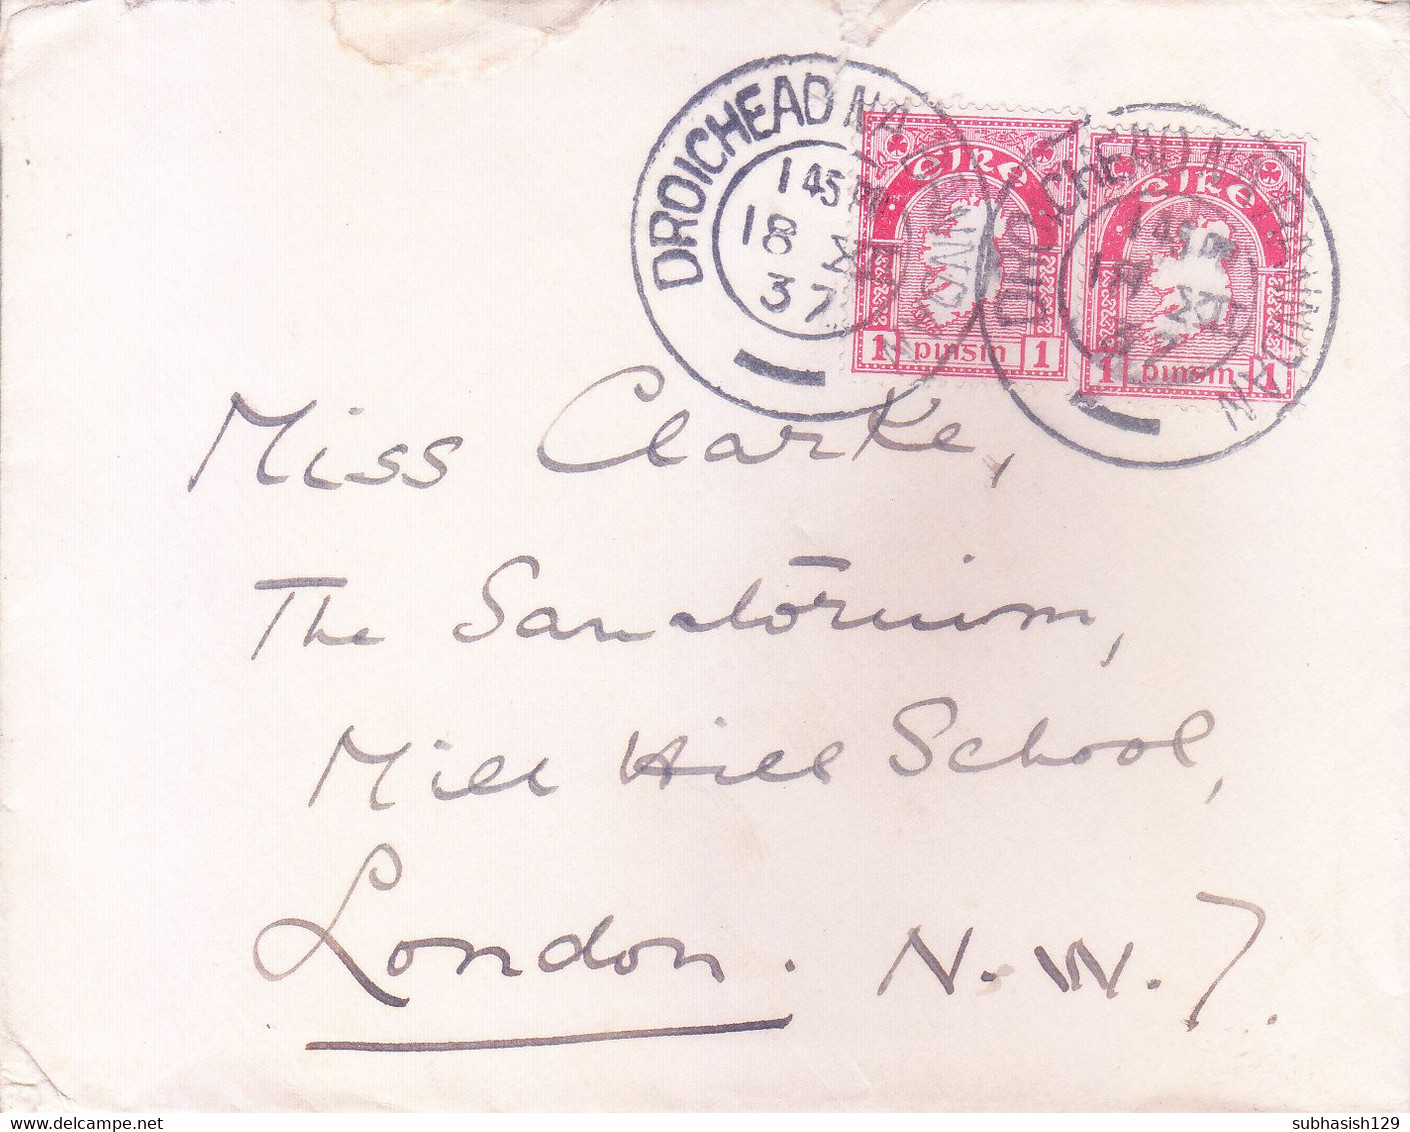 IRELAND : ENTIRE : YEAR 1937 : COVER POSTED FROM DROICHEAD NA RANNDAN FOR LONDON : USE OF 2v 1 PINSIN STAMPS - Covers & Documents